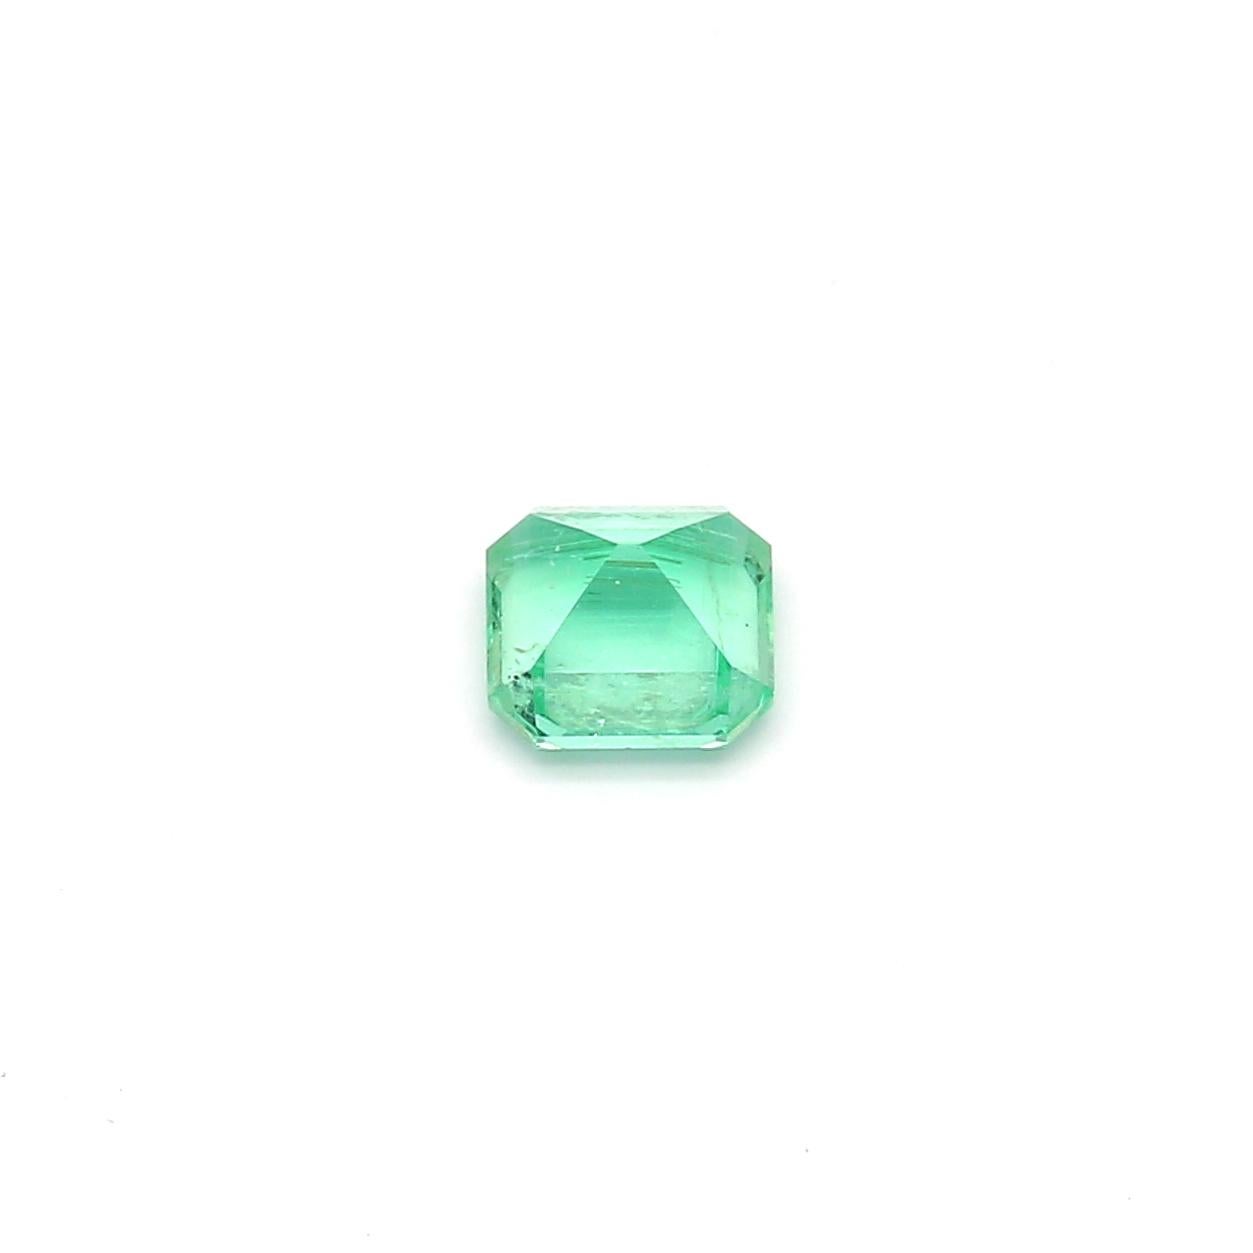 Emerald cut Emeralds are the most popular among other shapes. They are often known as the “everyday emerald” because they are perfectly suitable for everyday wear but can also add elegance to a formal setting.

This apple green 0.58 Emerald from